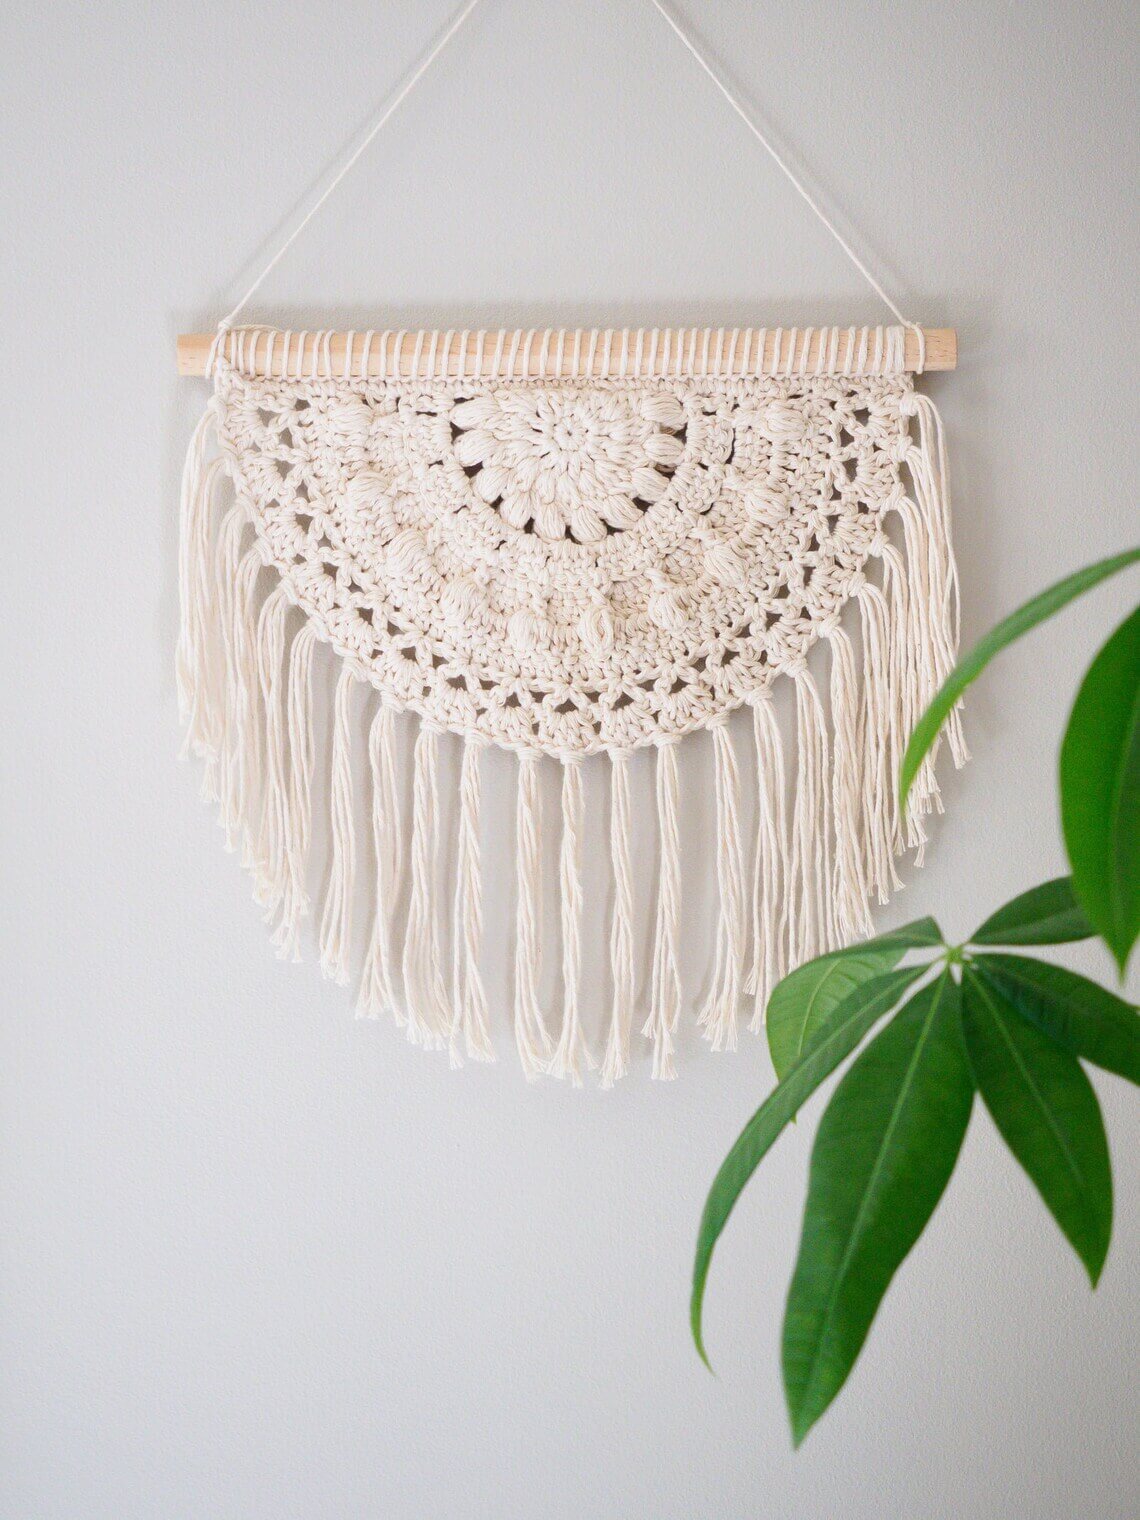 Crocheted Semicircle with Lots of Fringe